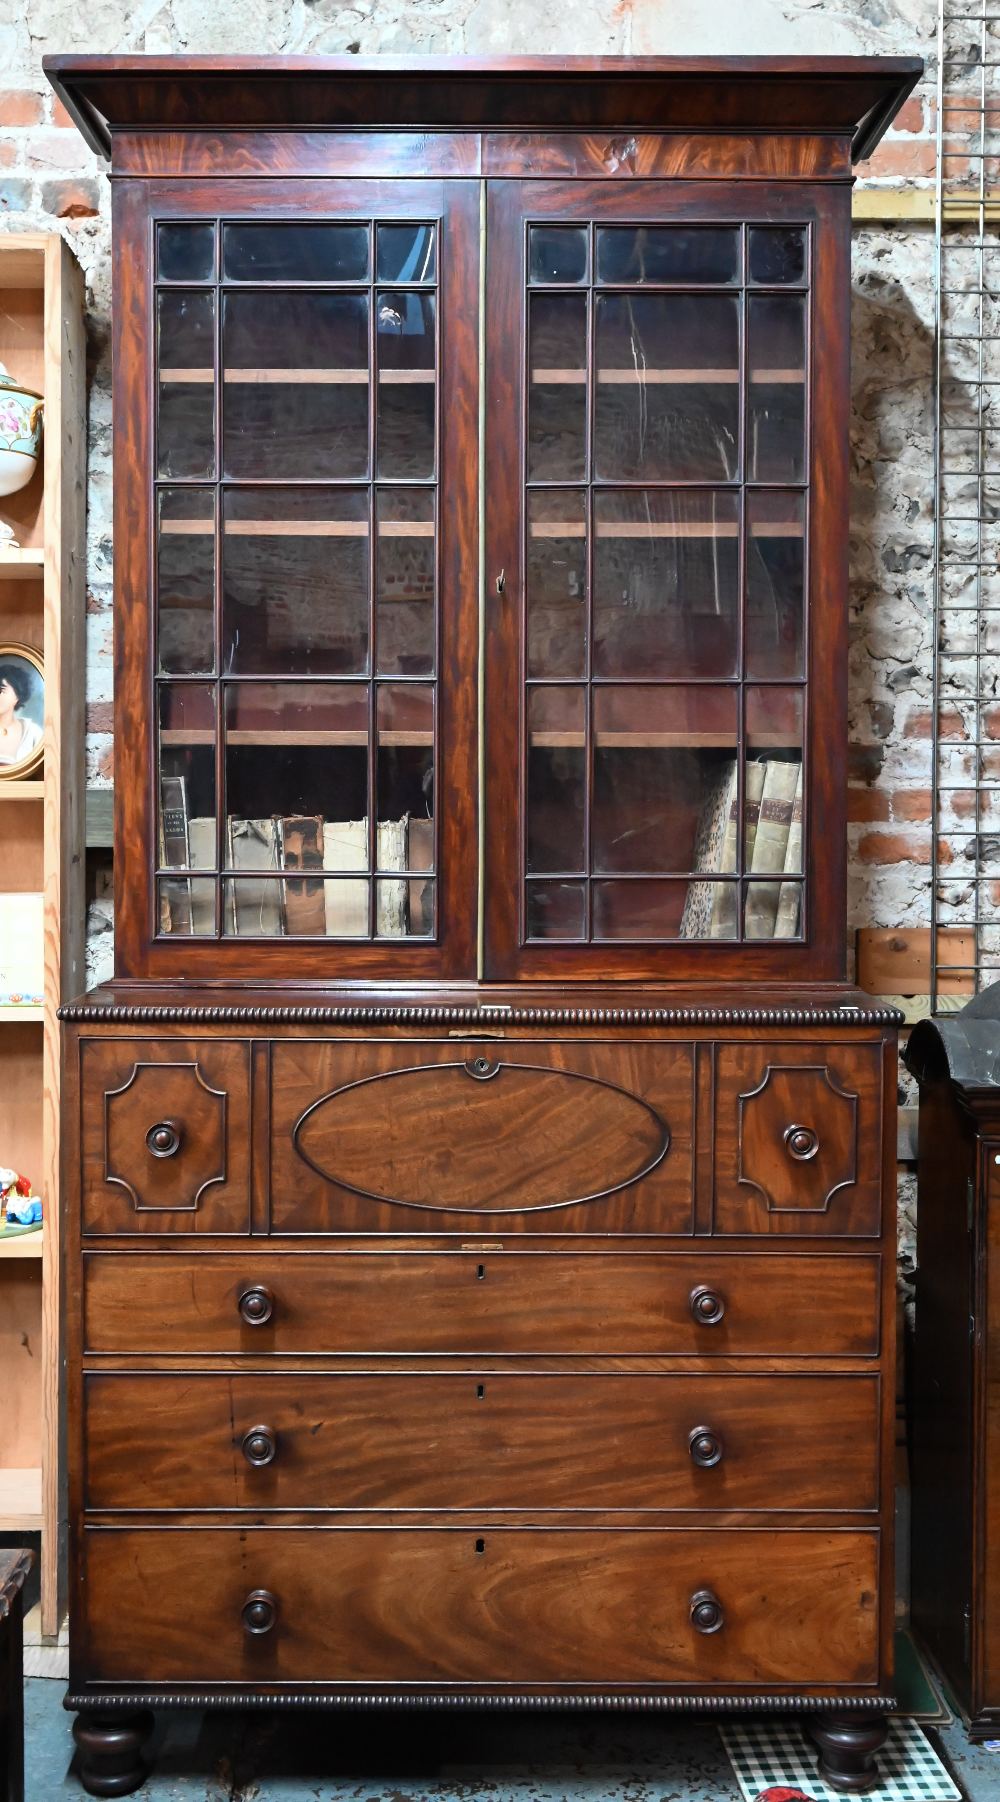 A Regency mahogany secrétaire library bookcase, the associated two door astragal glazed cabinet